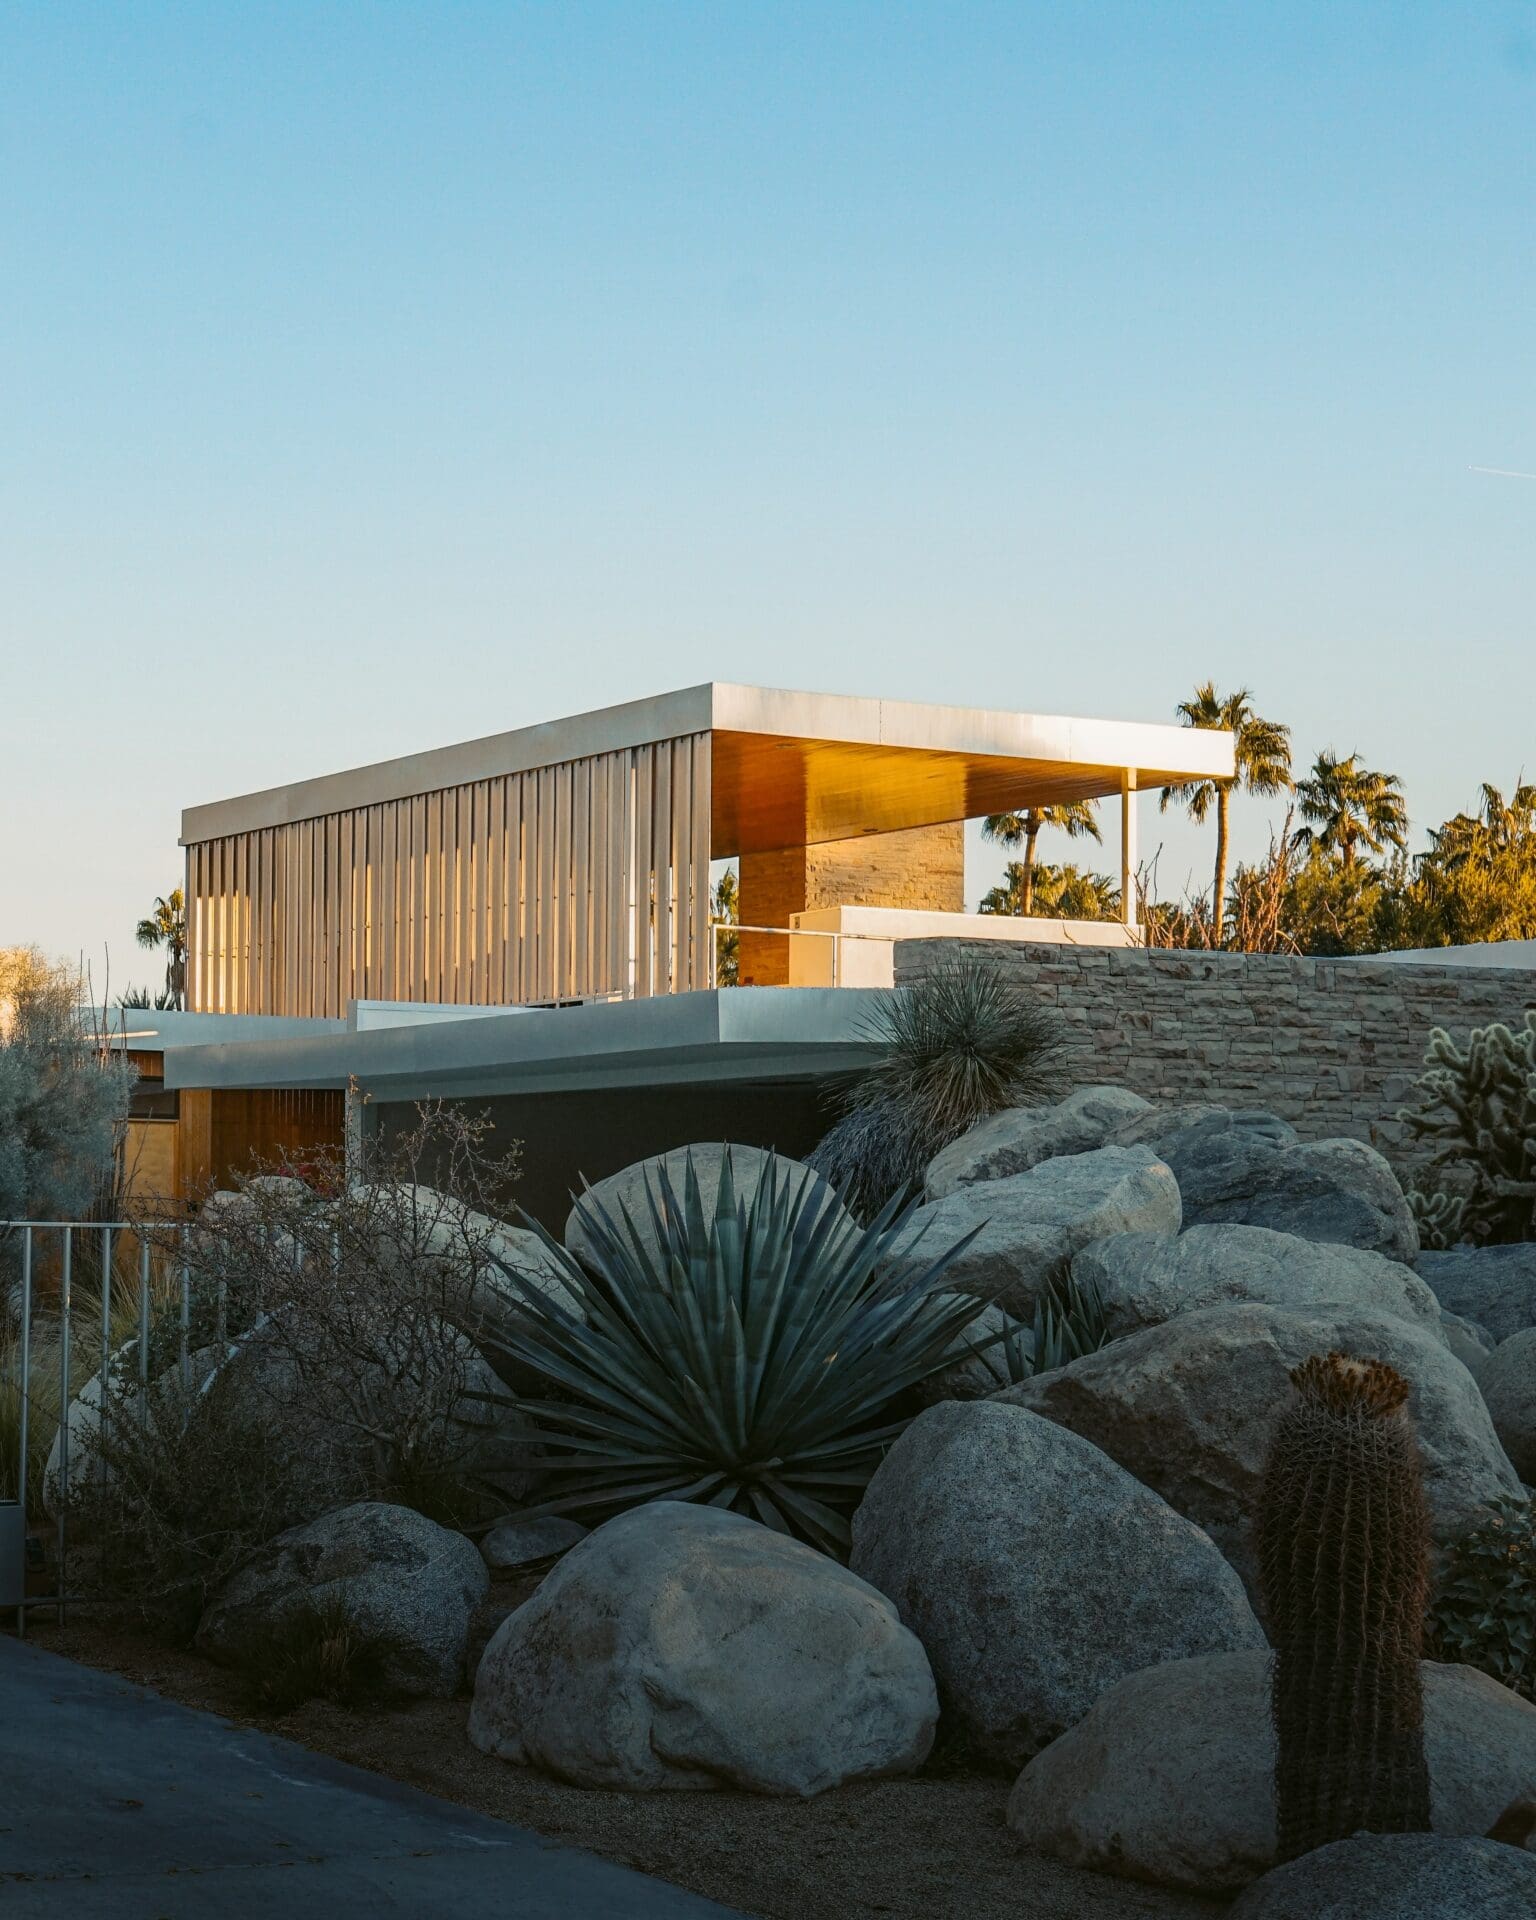 What to do in Palm Springs, California | A midcentury modern home lit in the golden evening sun against a cloudless blue sky